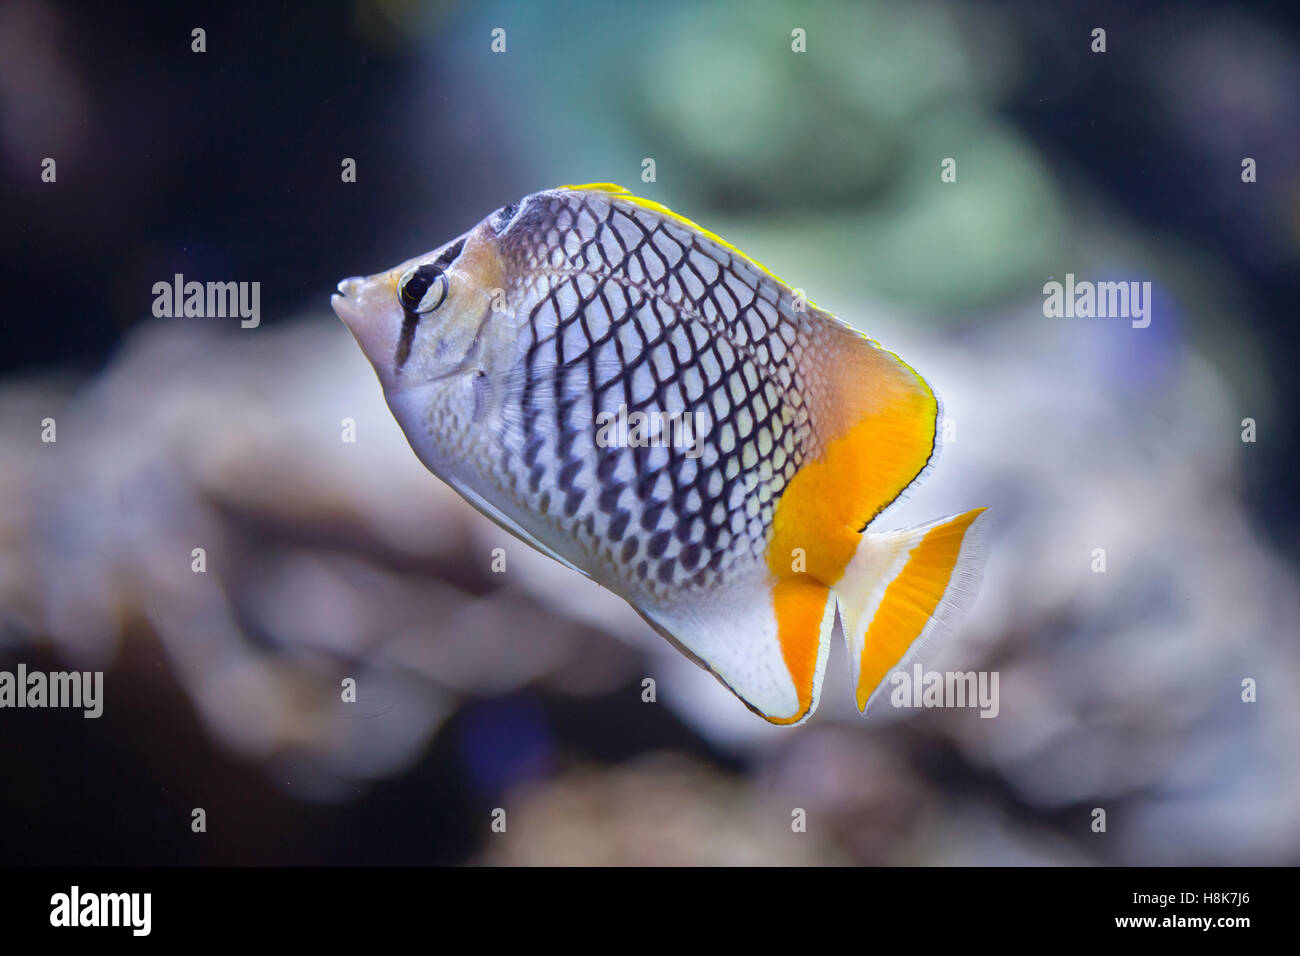 Pearlscale butterflyfish (Chaetodon xanthurus), also known as the Philippines chevron butterflyfish. Stock Photo